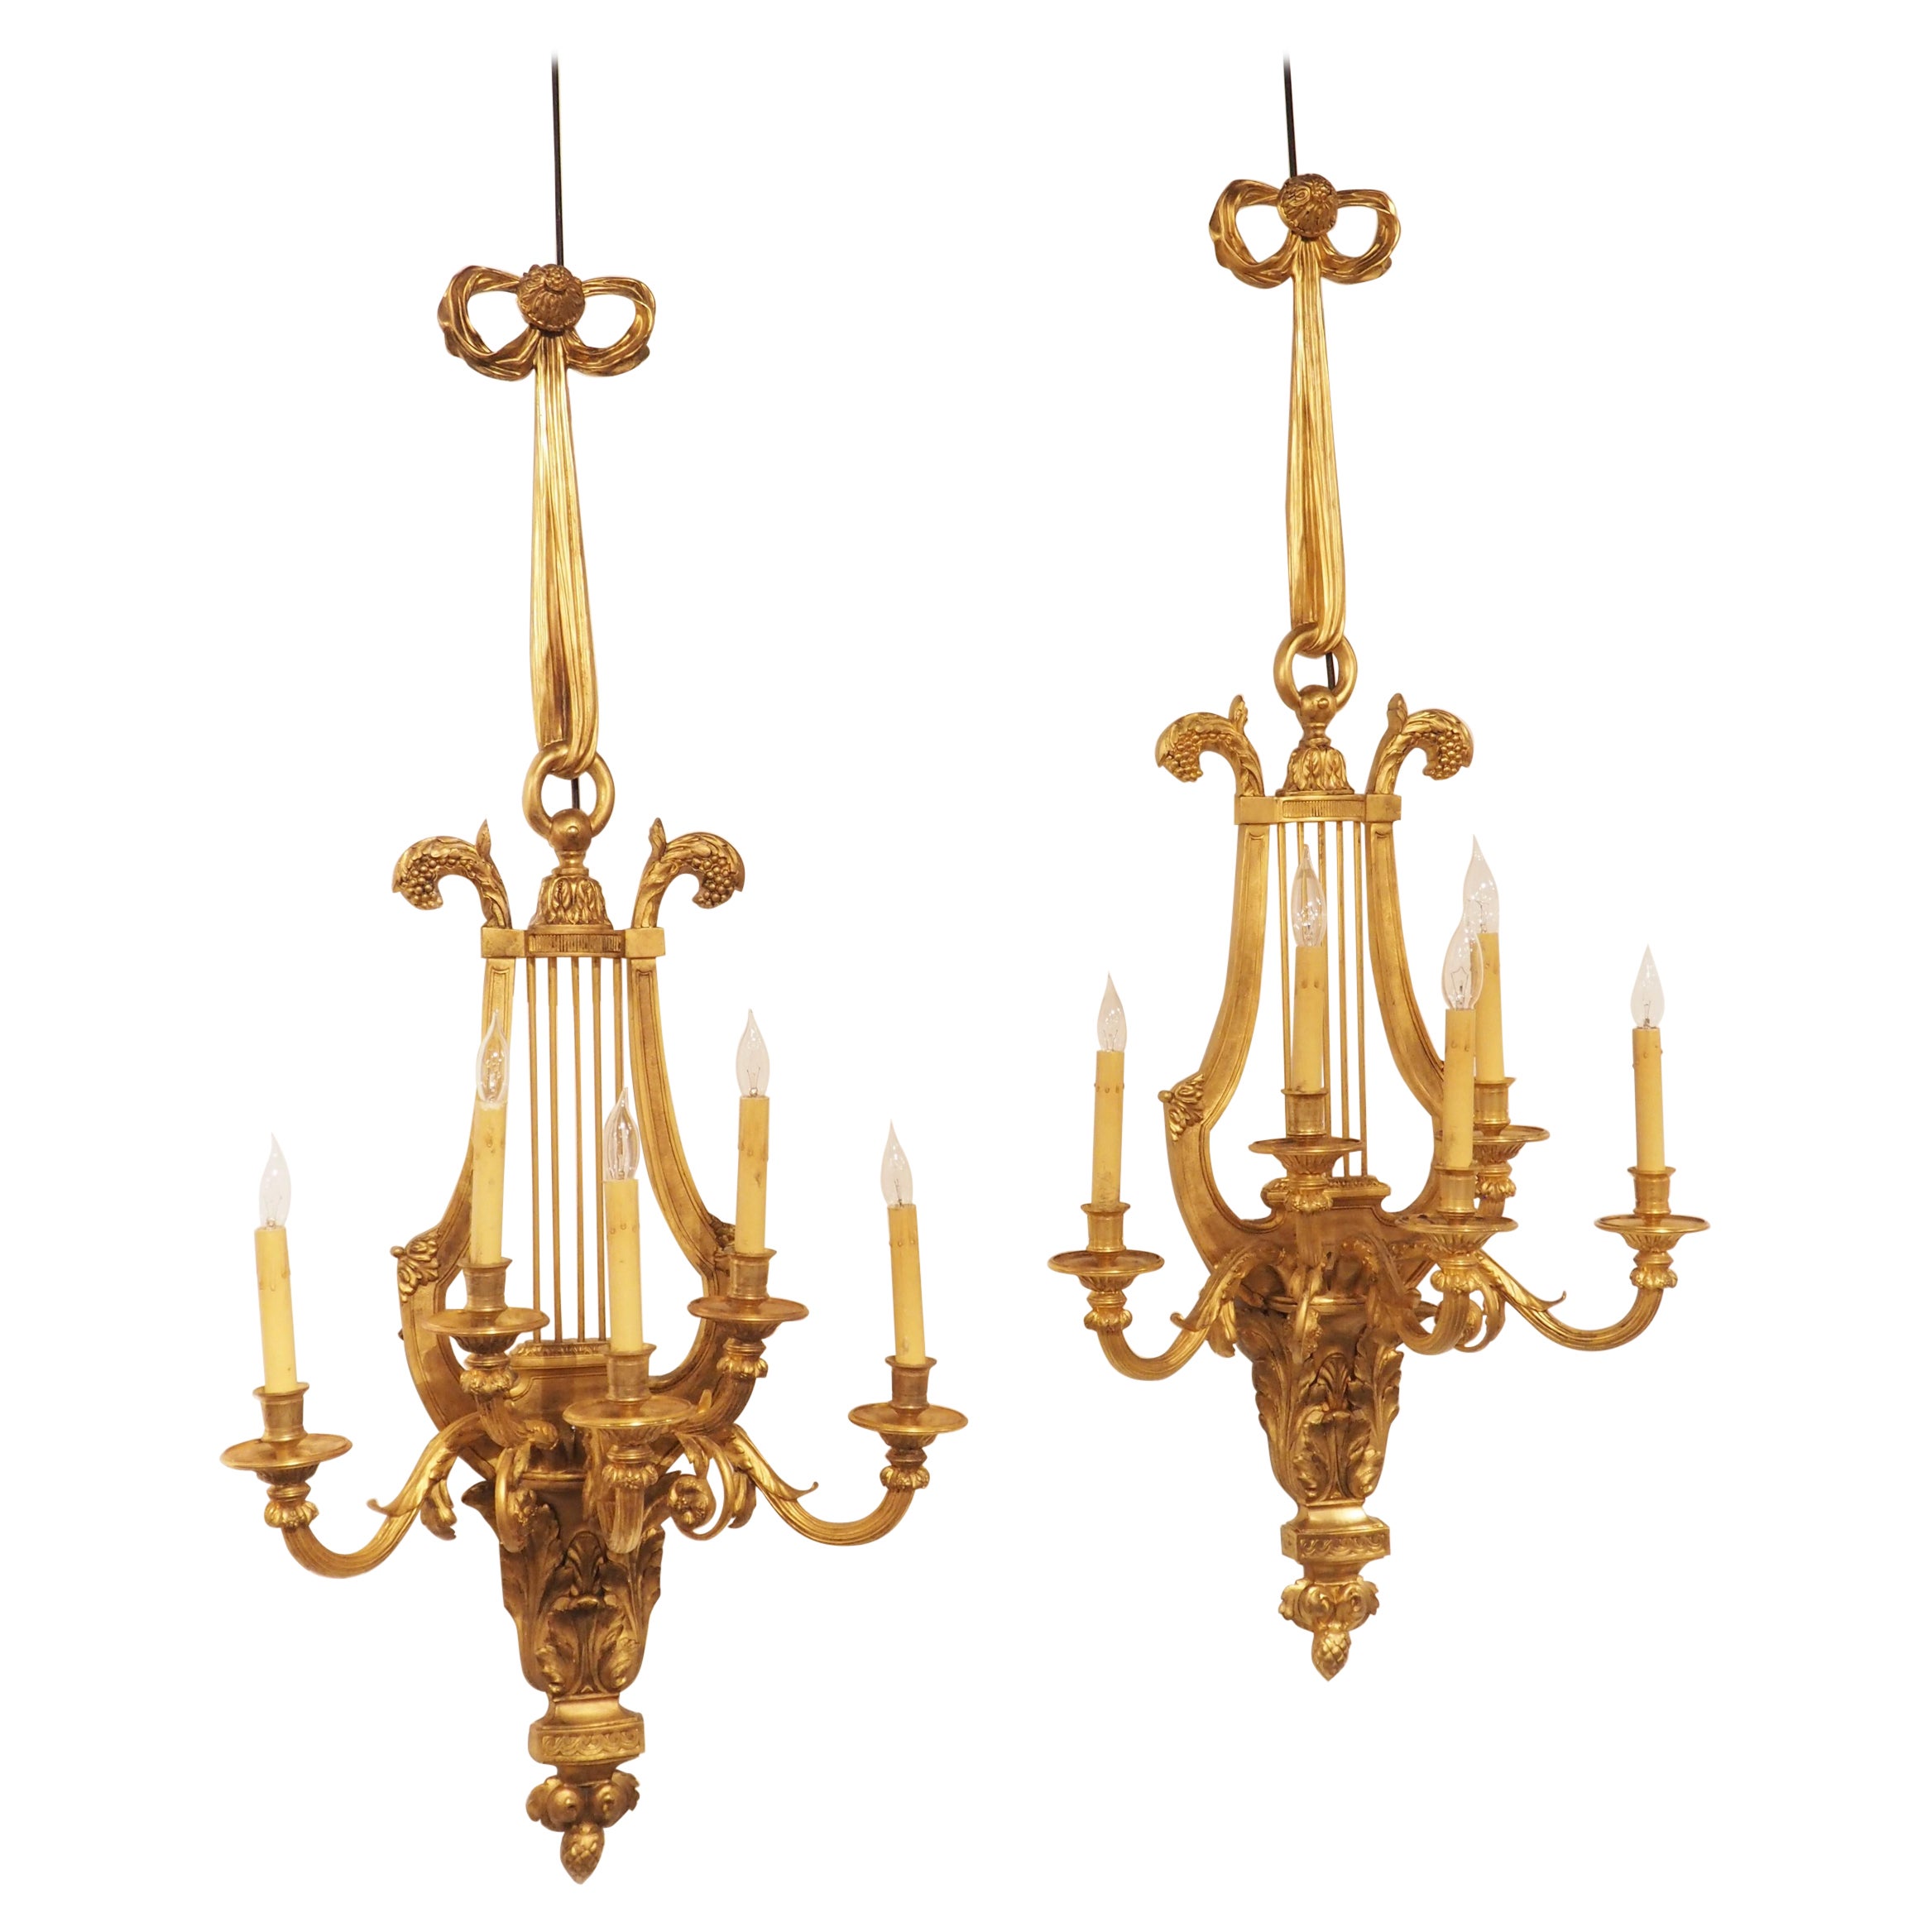 Pair of Tall French Louis XVI Style Gilt Bronze Sconces, C. 1880